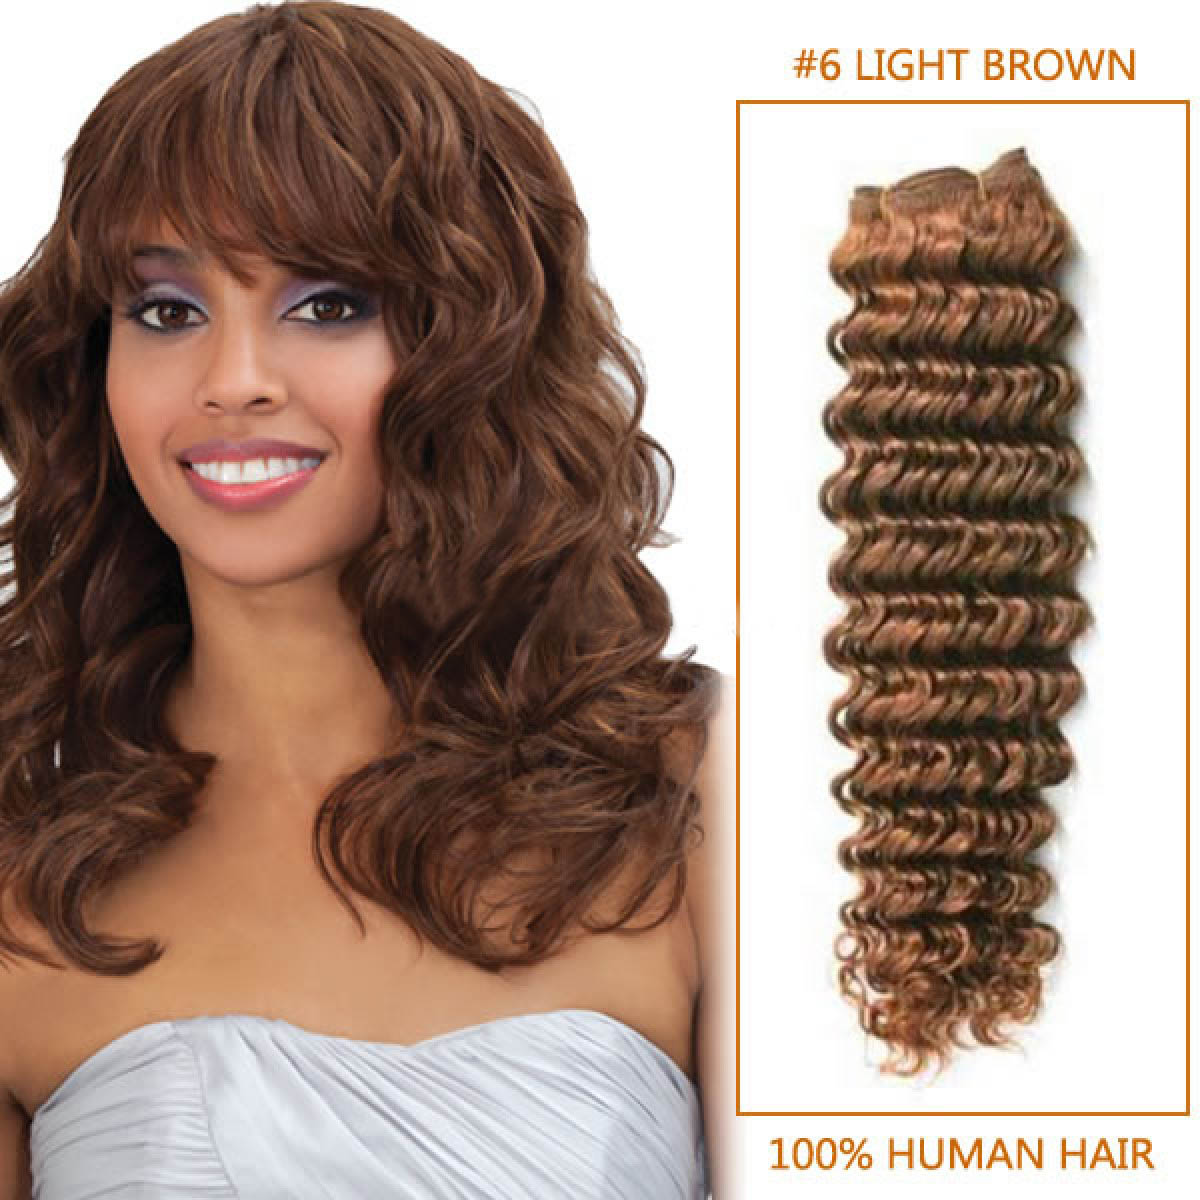 18 Inch 6 Light Brown Deep Wave Indian Remy Hair Wefts 